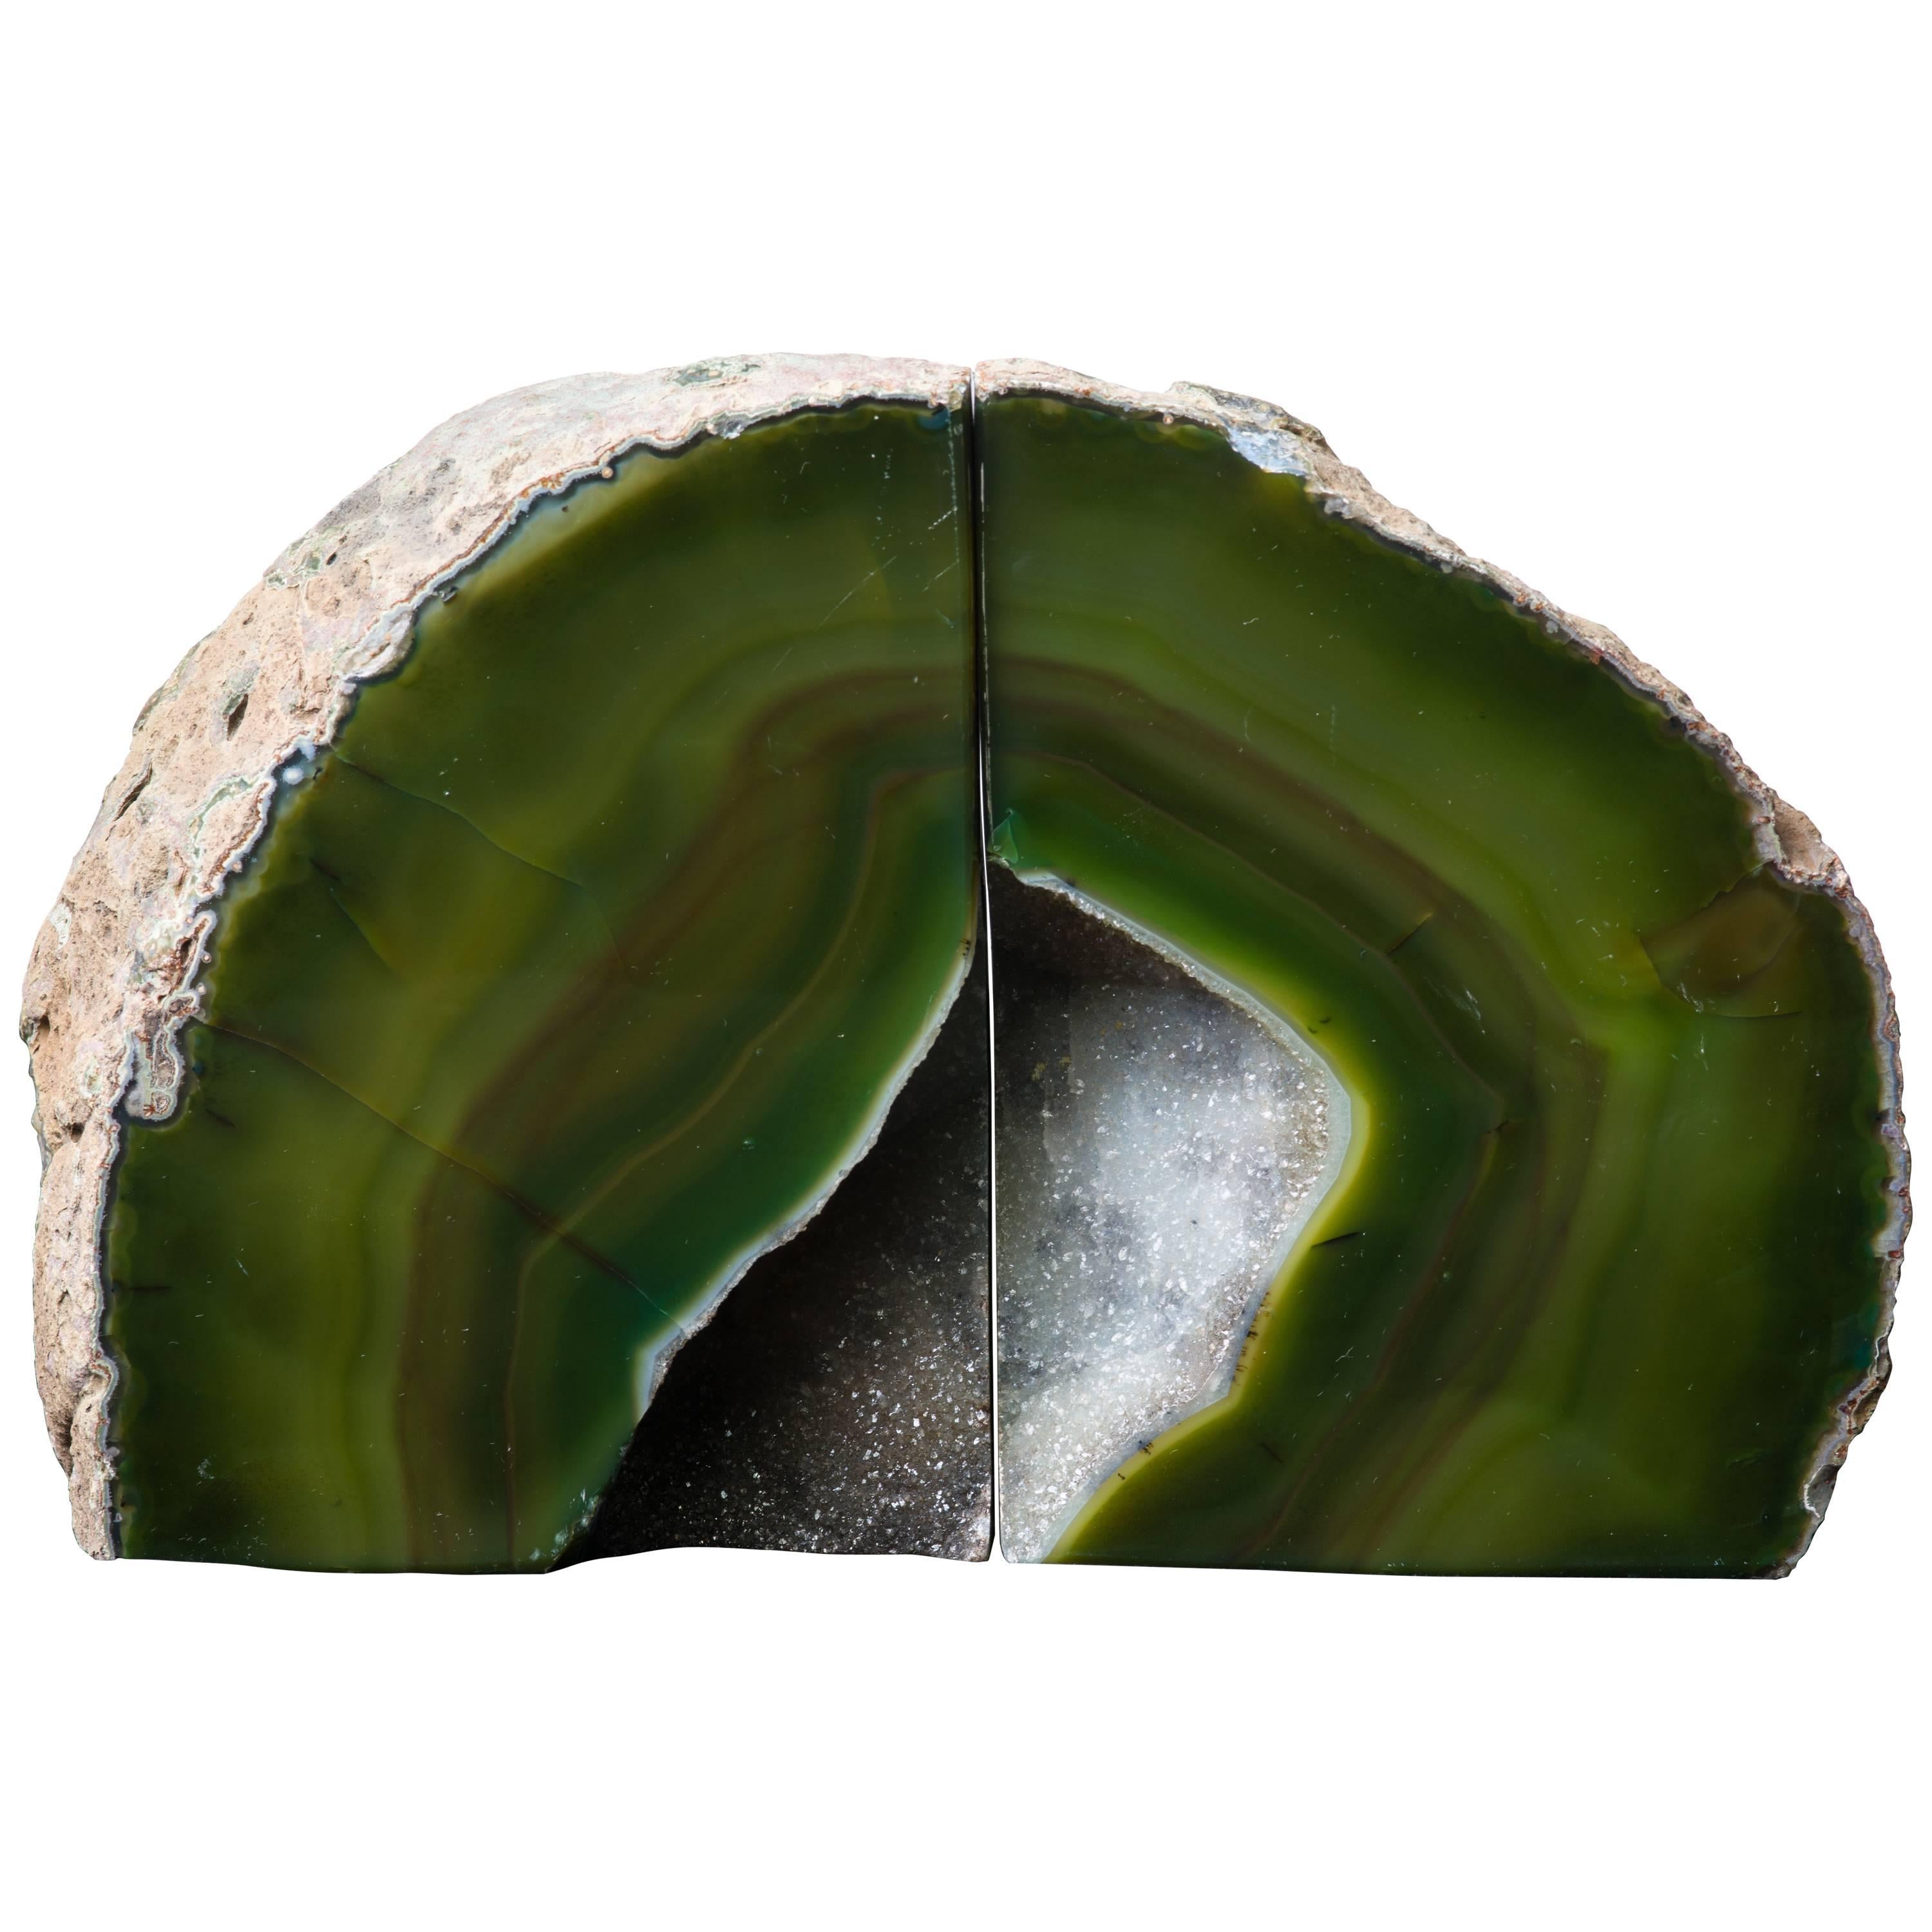 Stunning pair of chunky organic modern specimens. Handcut agate stone with rock quartz crystalline centers. Polished front and sides with natural raw edges. In striped hues of moss green, olive, and brown. Elegant shelf and desk accessories, and